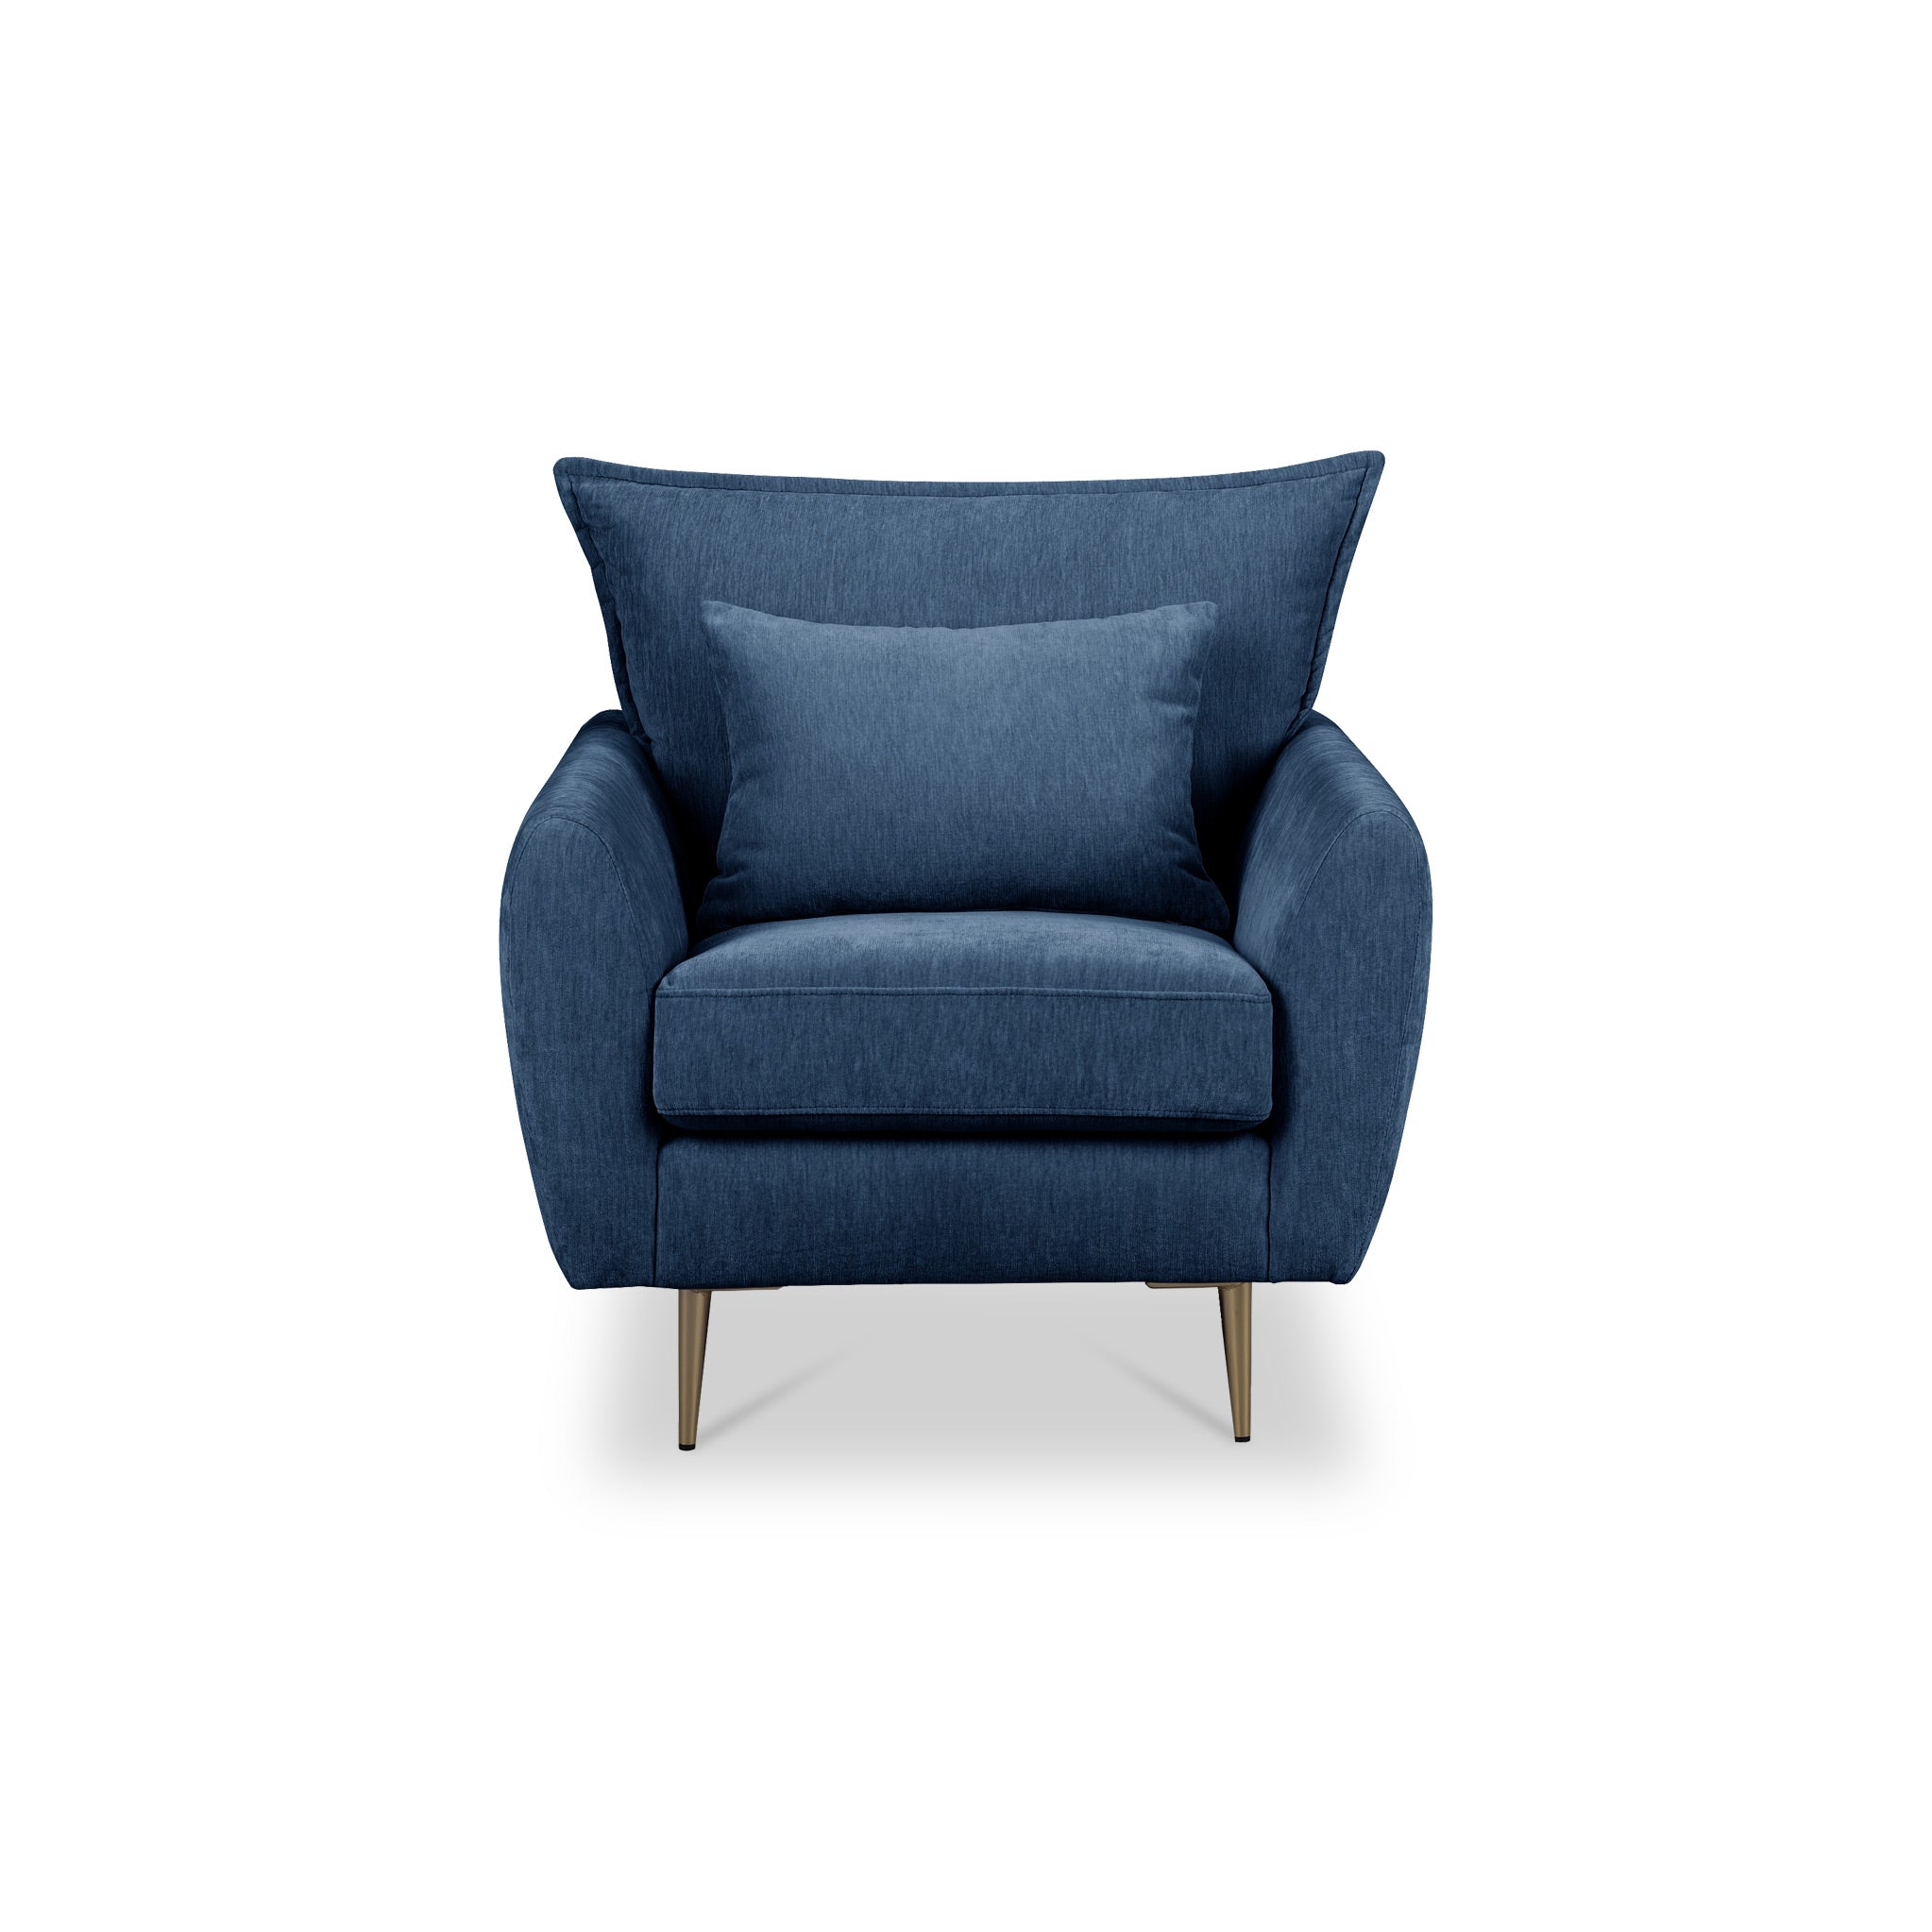 Evelyn Armchair Scandi Style Navy Charcoal Mink Living Room Chair